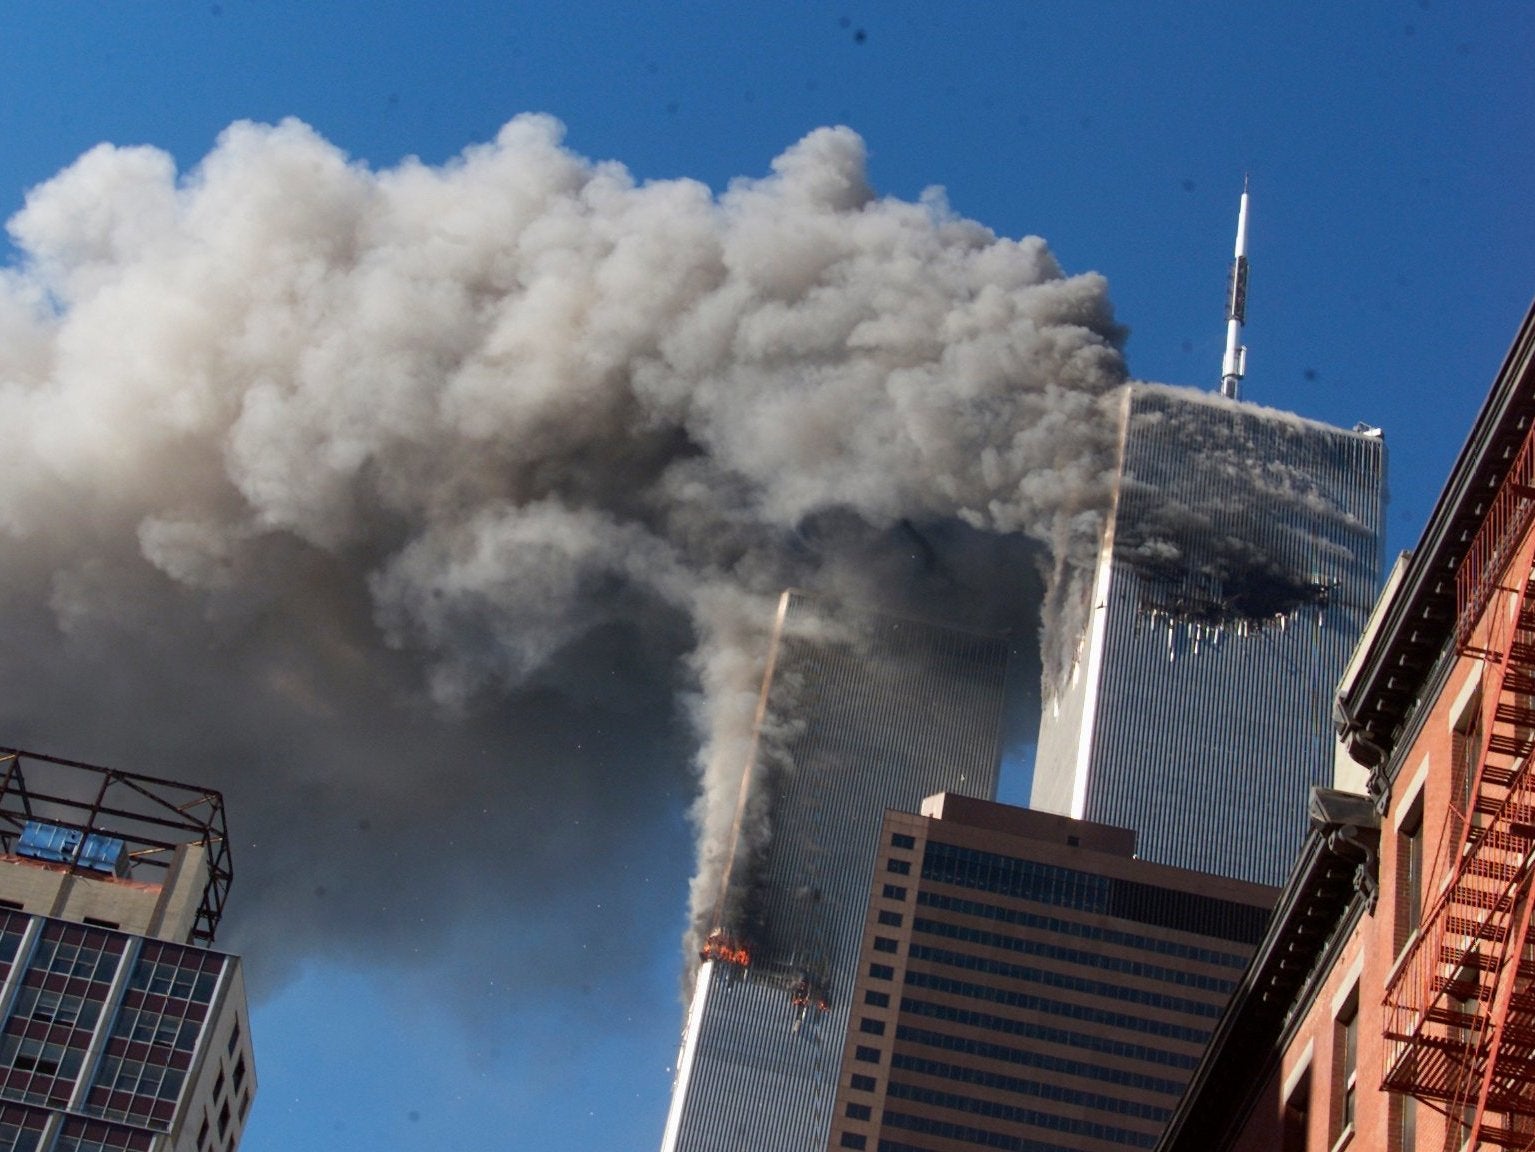 Twin towers after hijacked planes crashed into towers